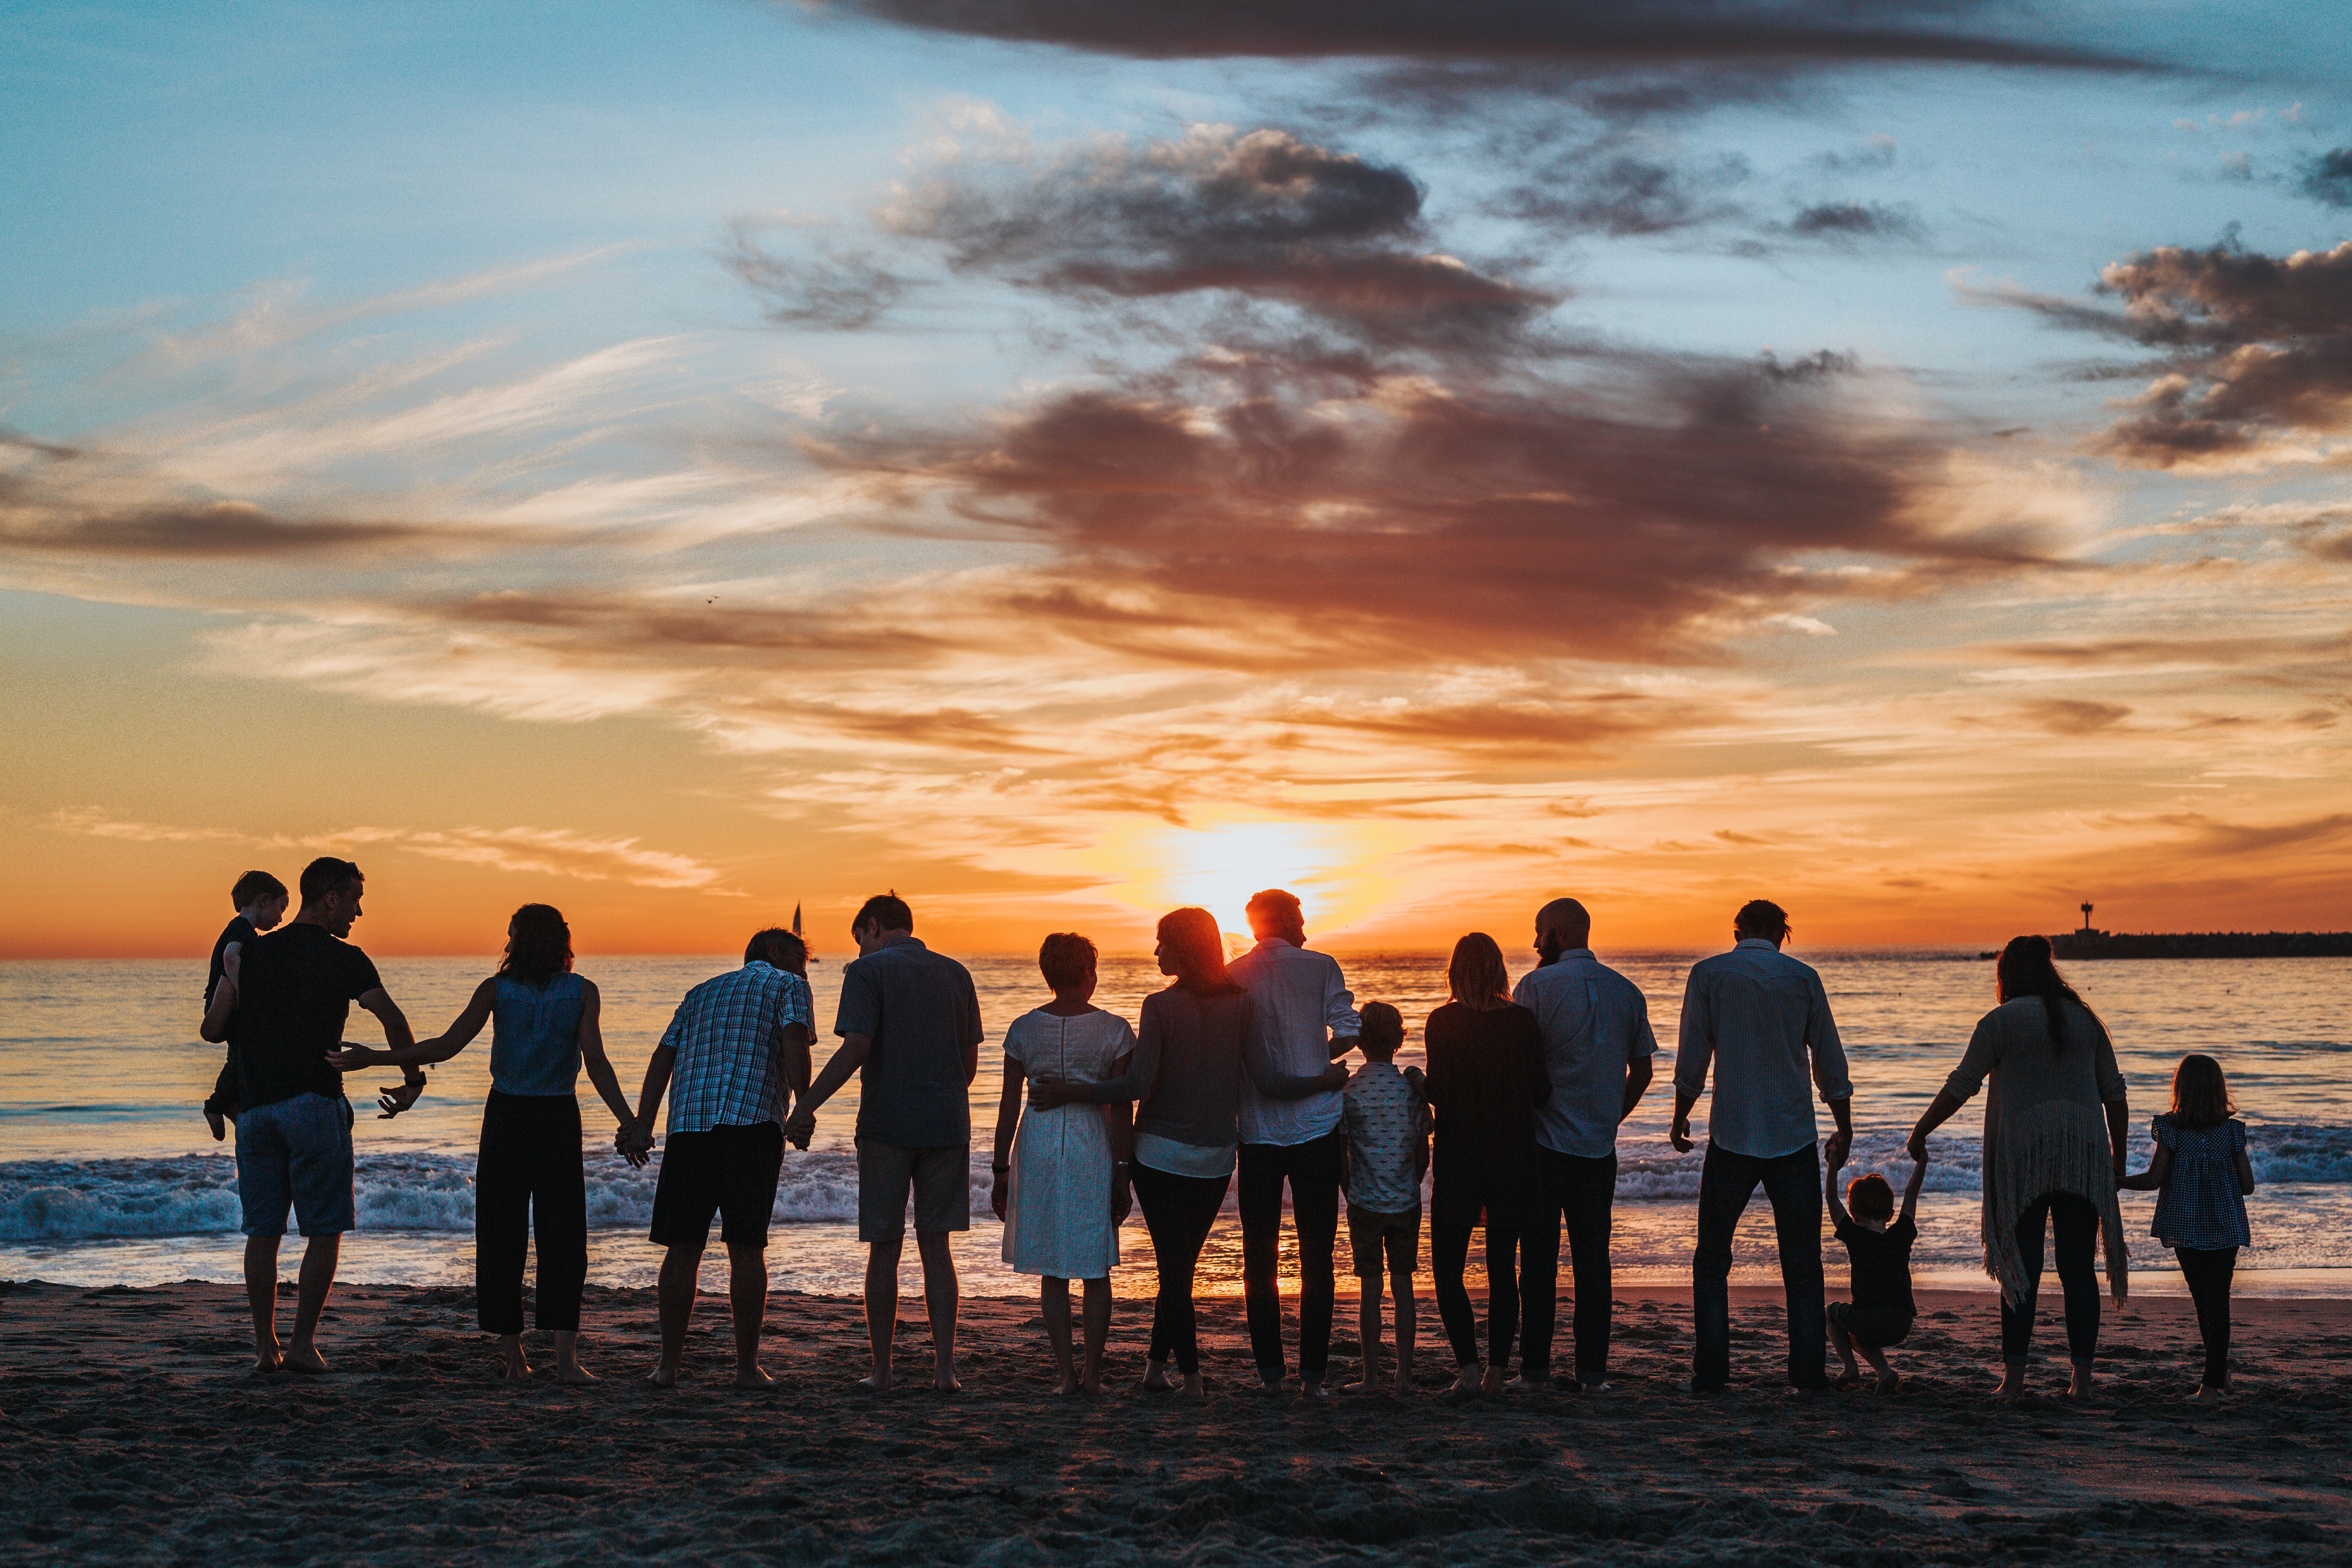 A group of people holding hands staring at a sunset in the sea